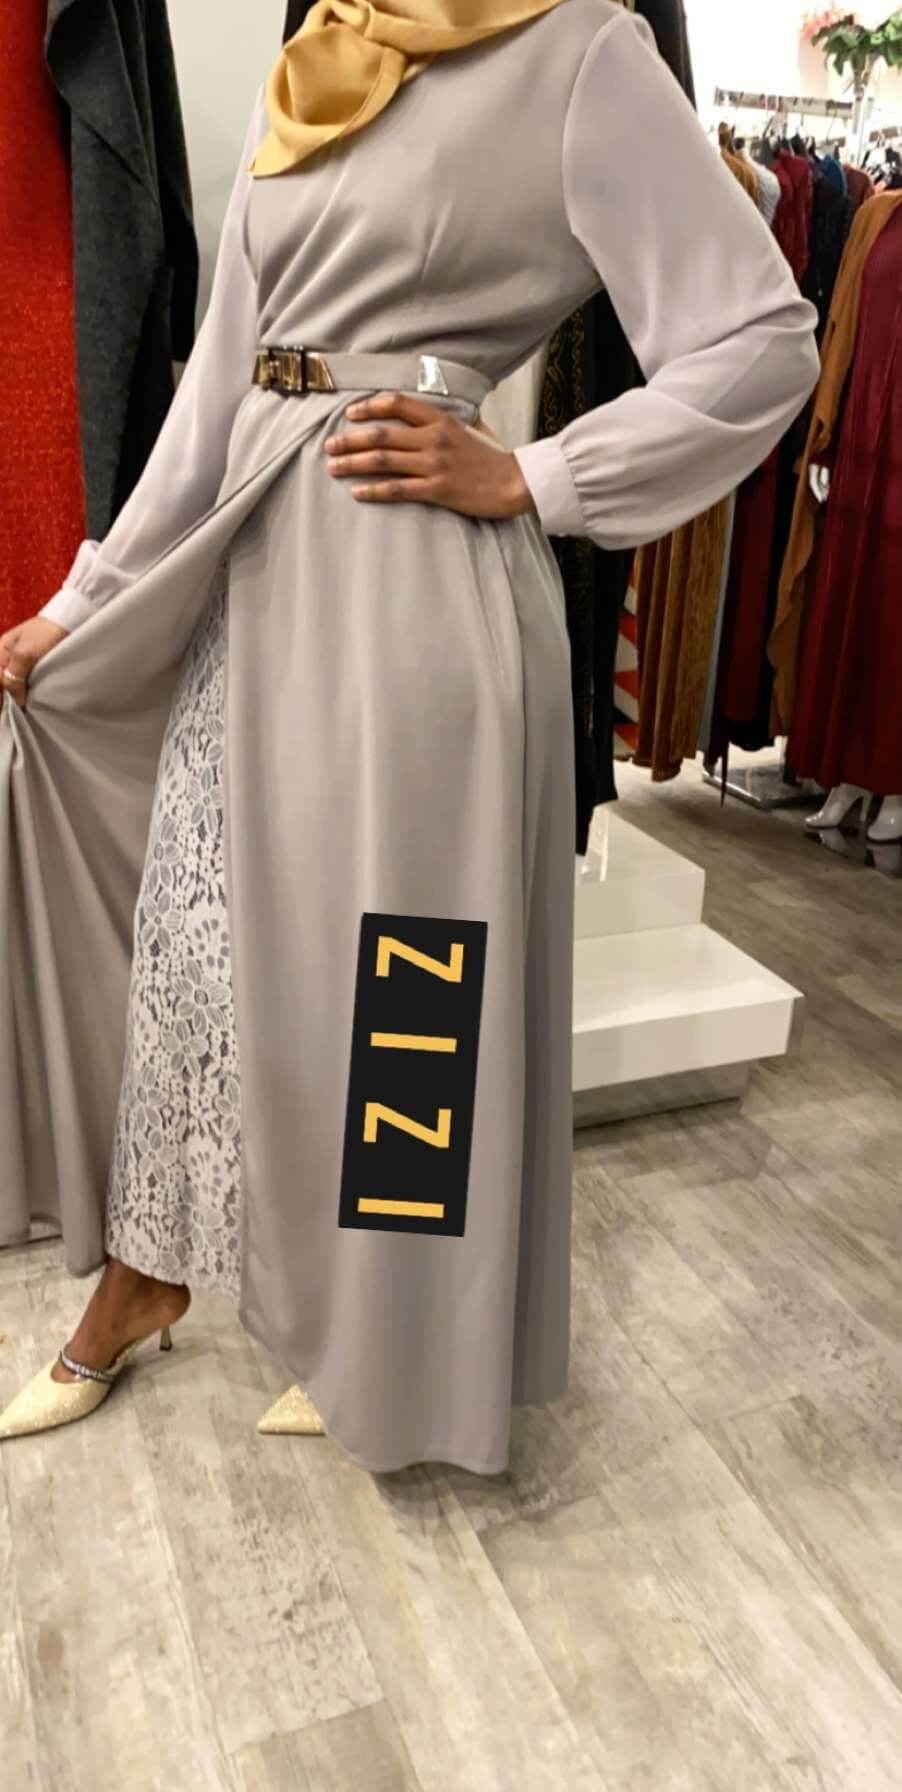 Aisha Lace Evening Dress in grey color available at ZIZI Boutique